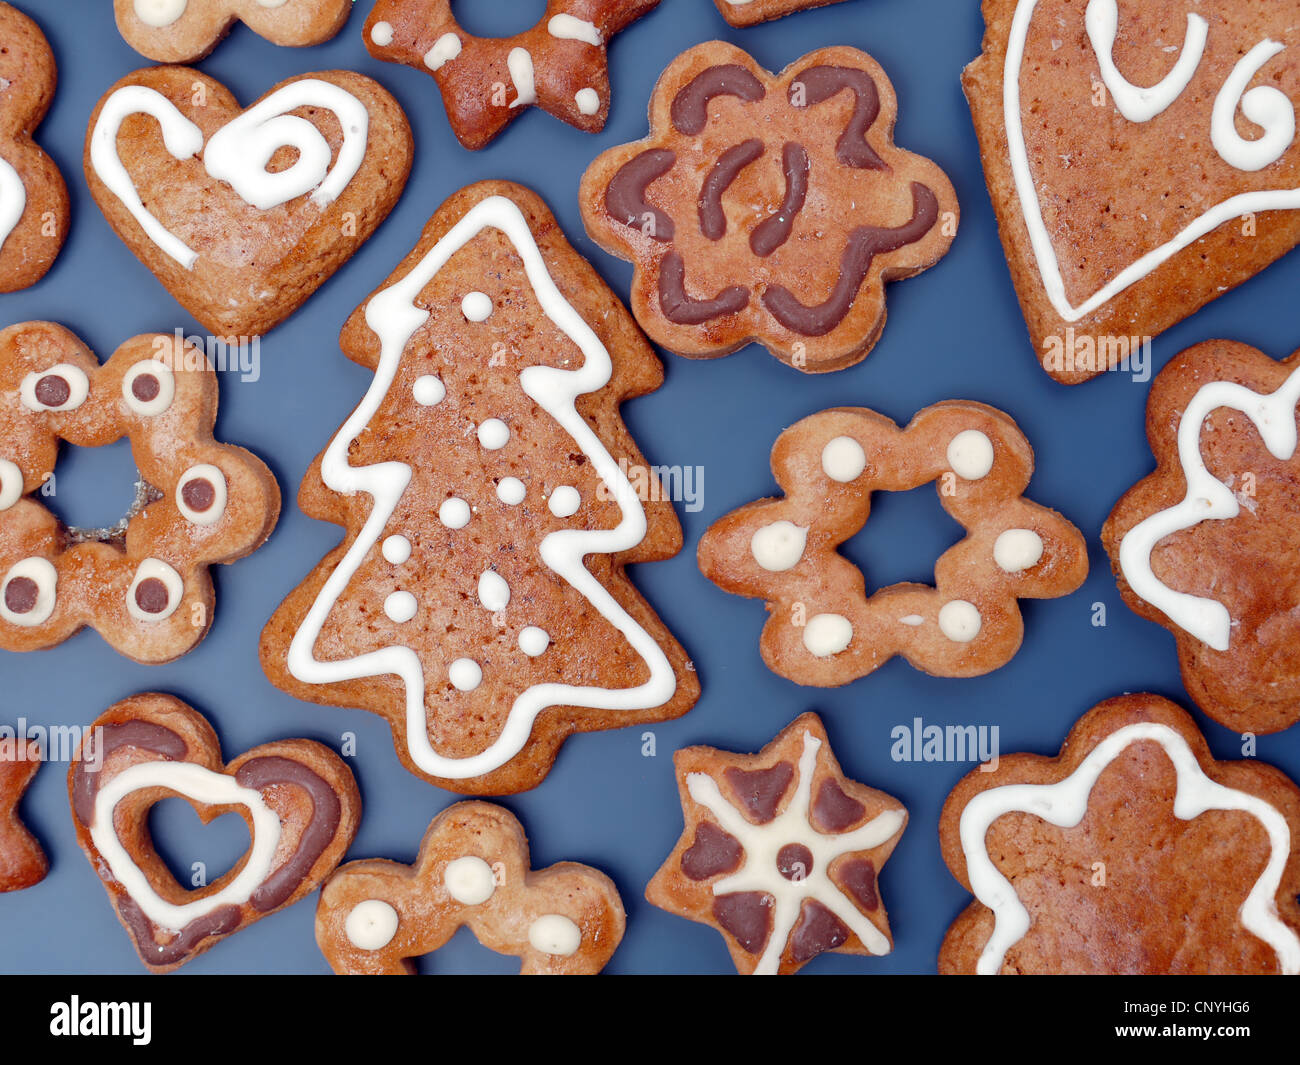 Decorative seasonal shapes of gingerbread cookies shot from above over dark blue background Stock Photo